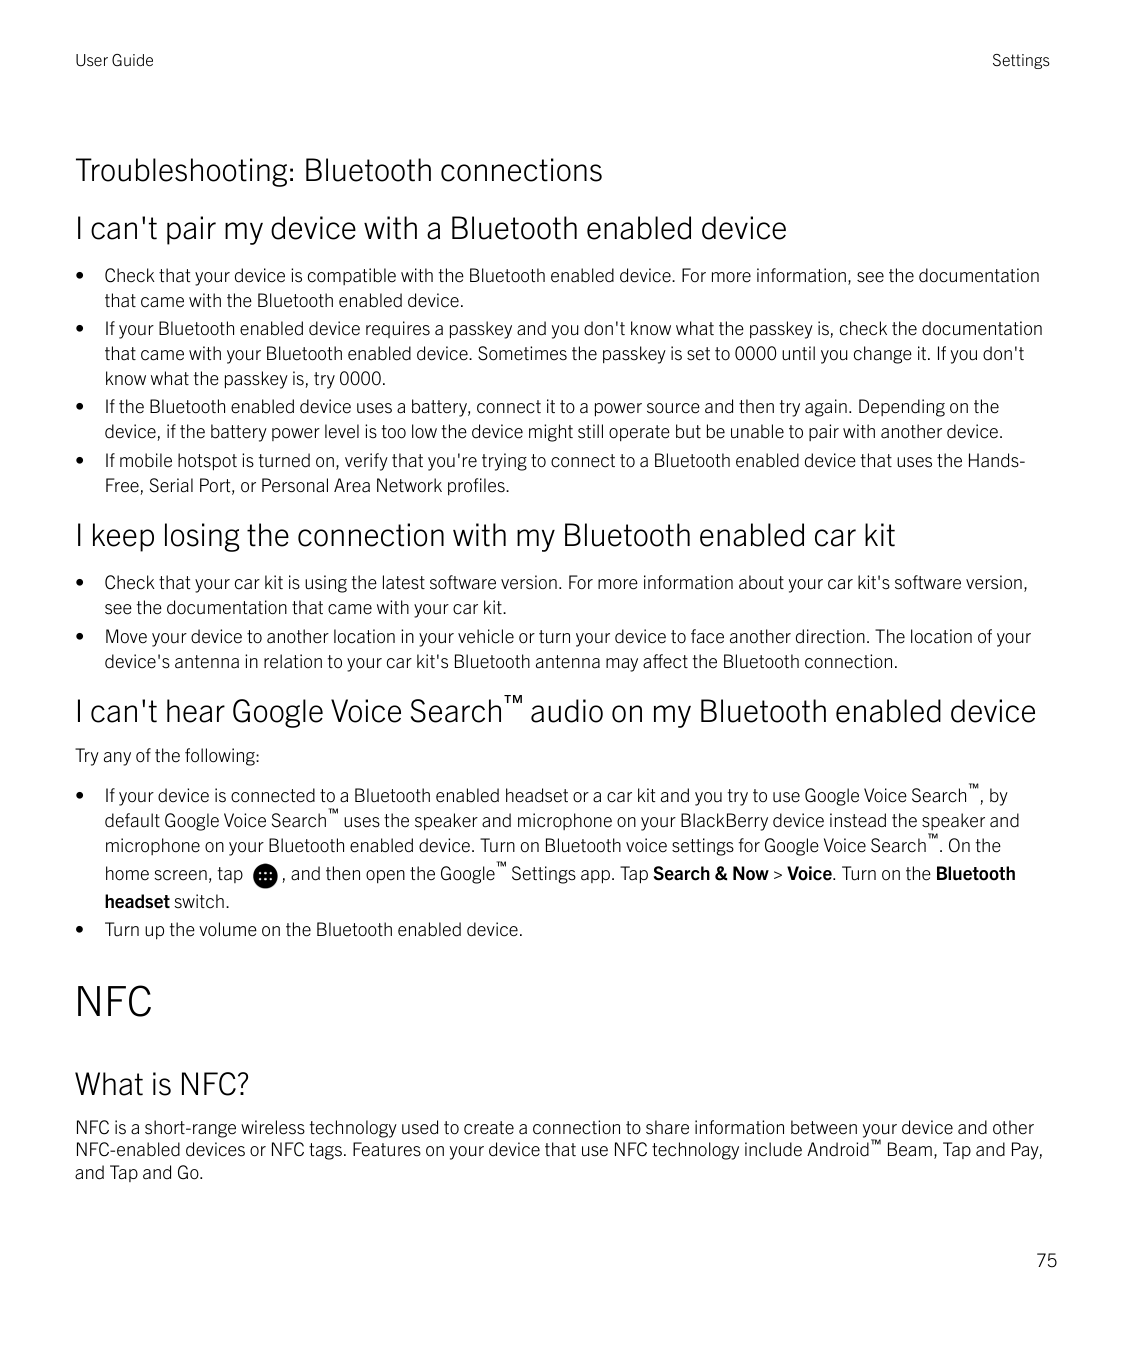 User GuideSettingsTroubleshooting: Bluetooth connectionsI can't pair my device with a Bluetooth enabled device••••Check that you